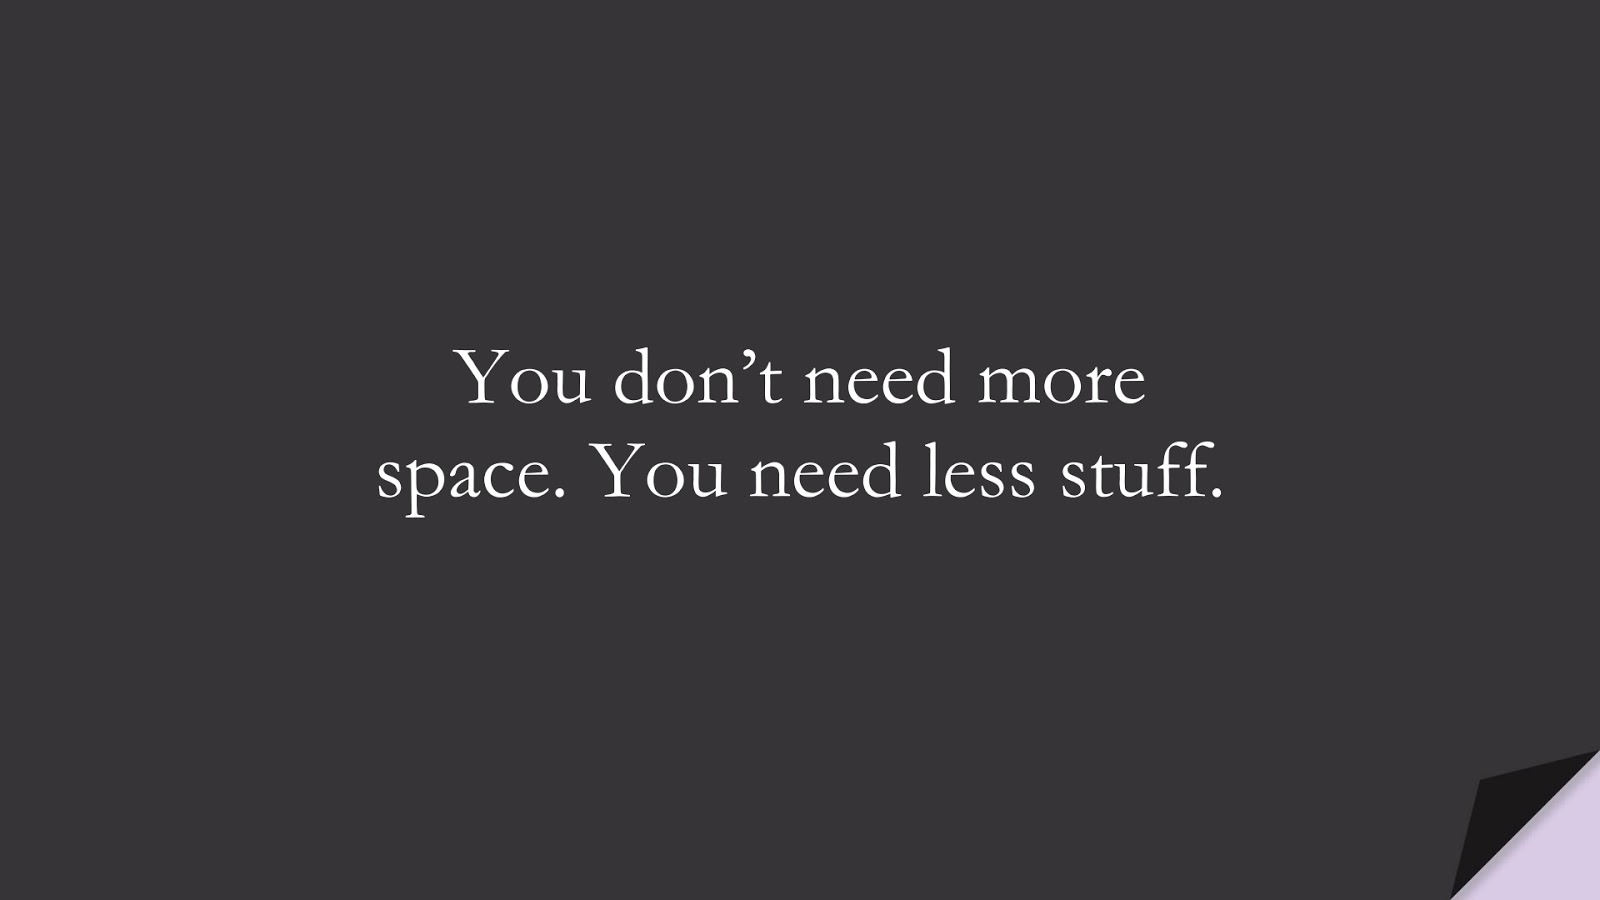 You don’t need more space. You need less stuff.FALSE